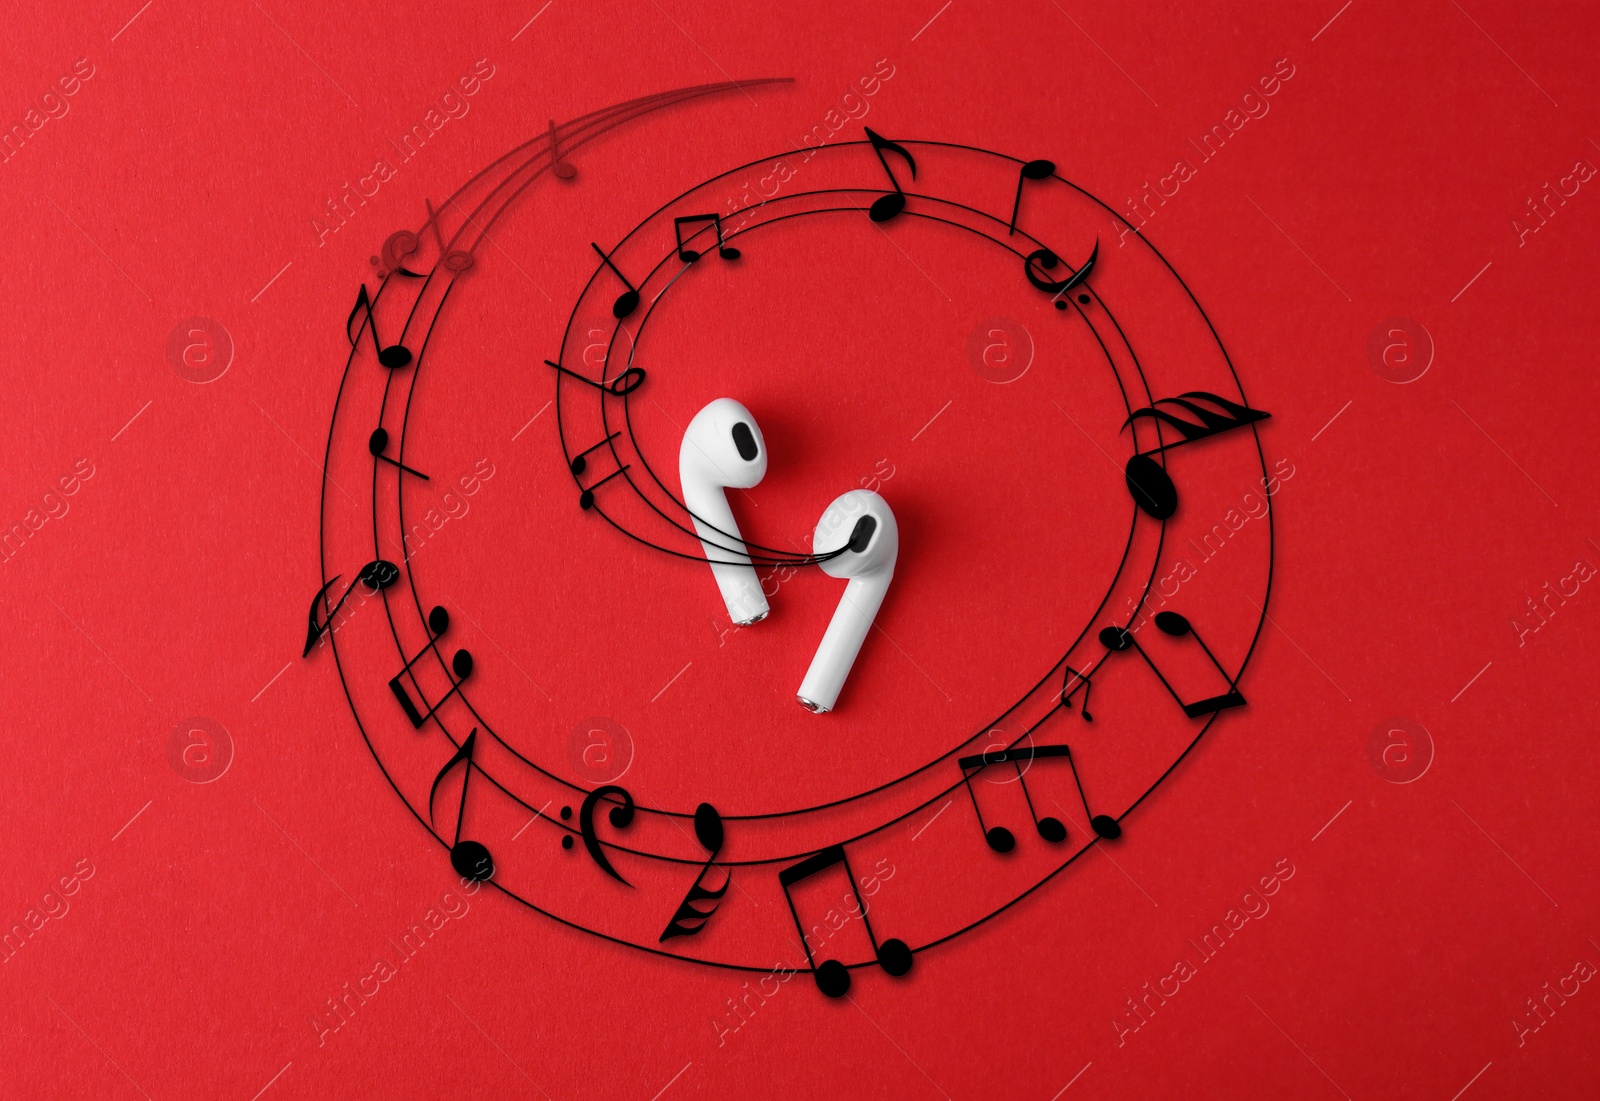 Image of Staff with music notes flowing from white wireless earphones on white background, top view